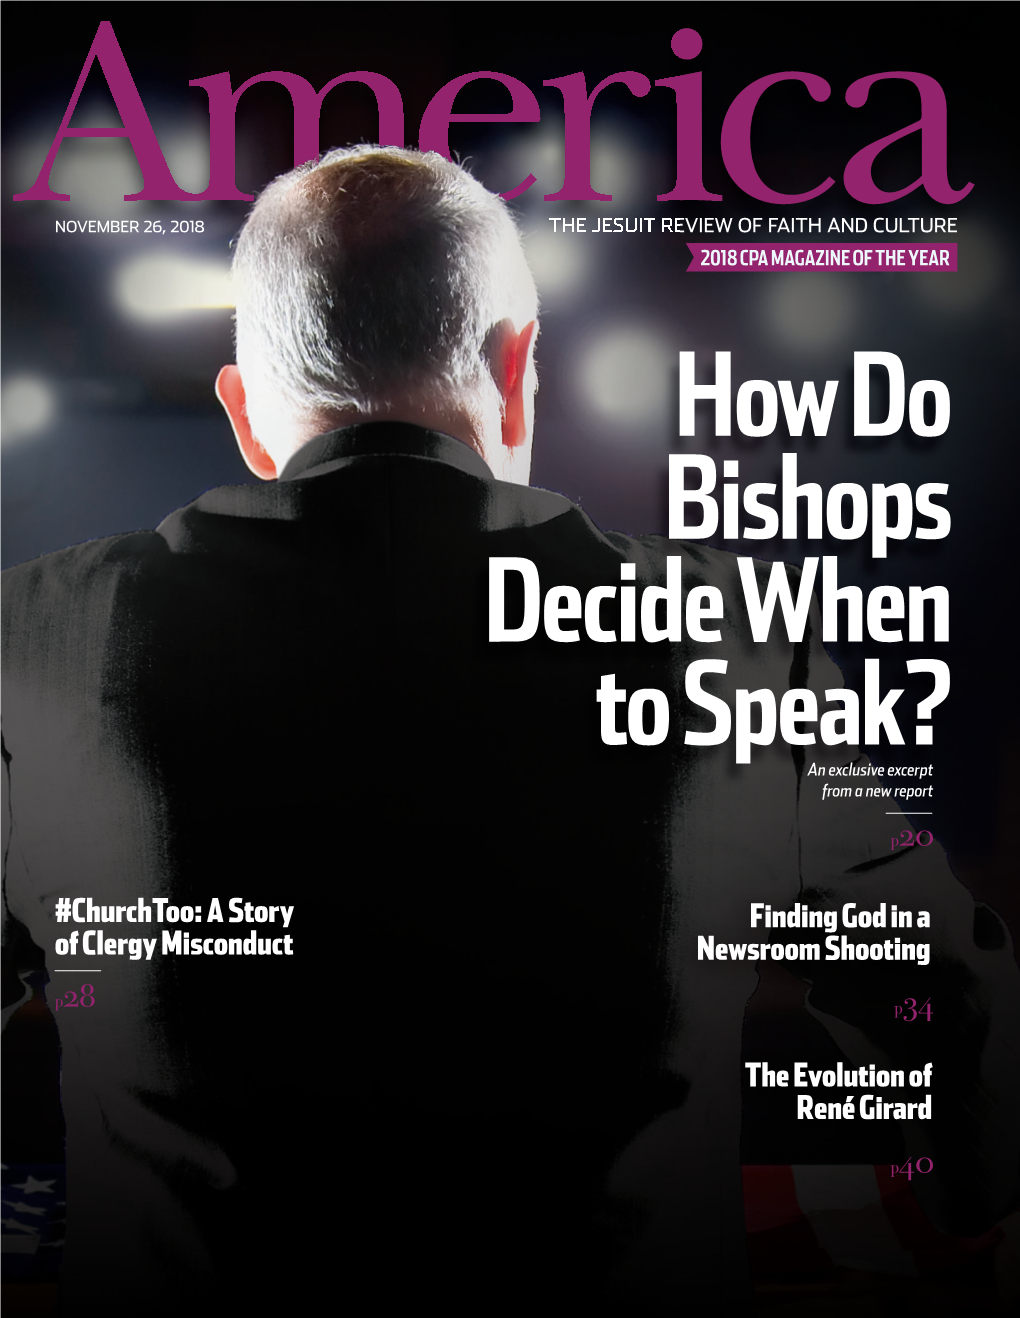 How Do Bishops Decide When to Speak? an Exclusive Excerpt from a New Report